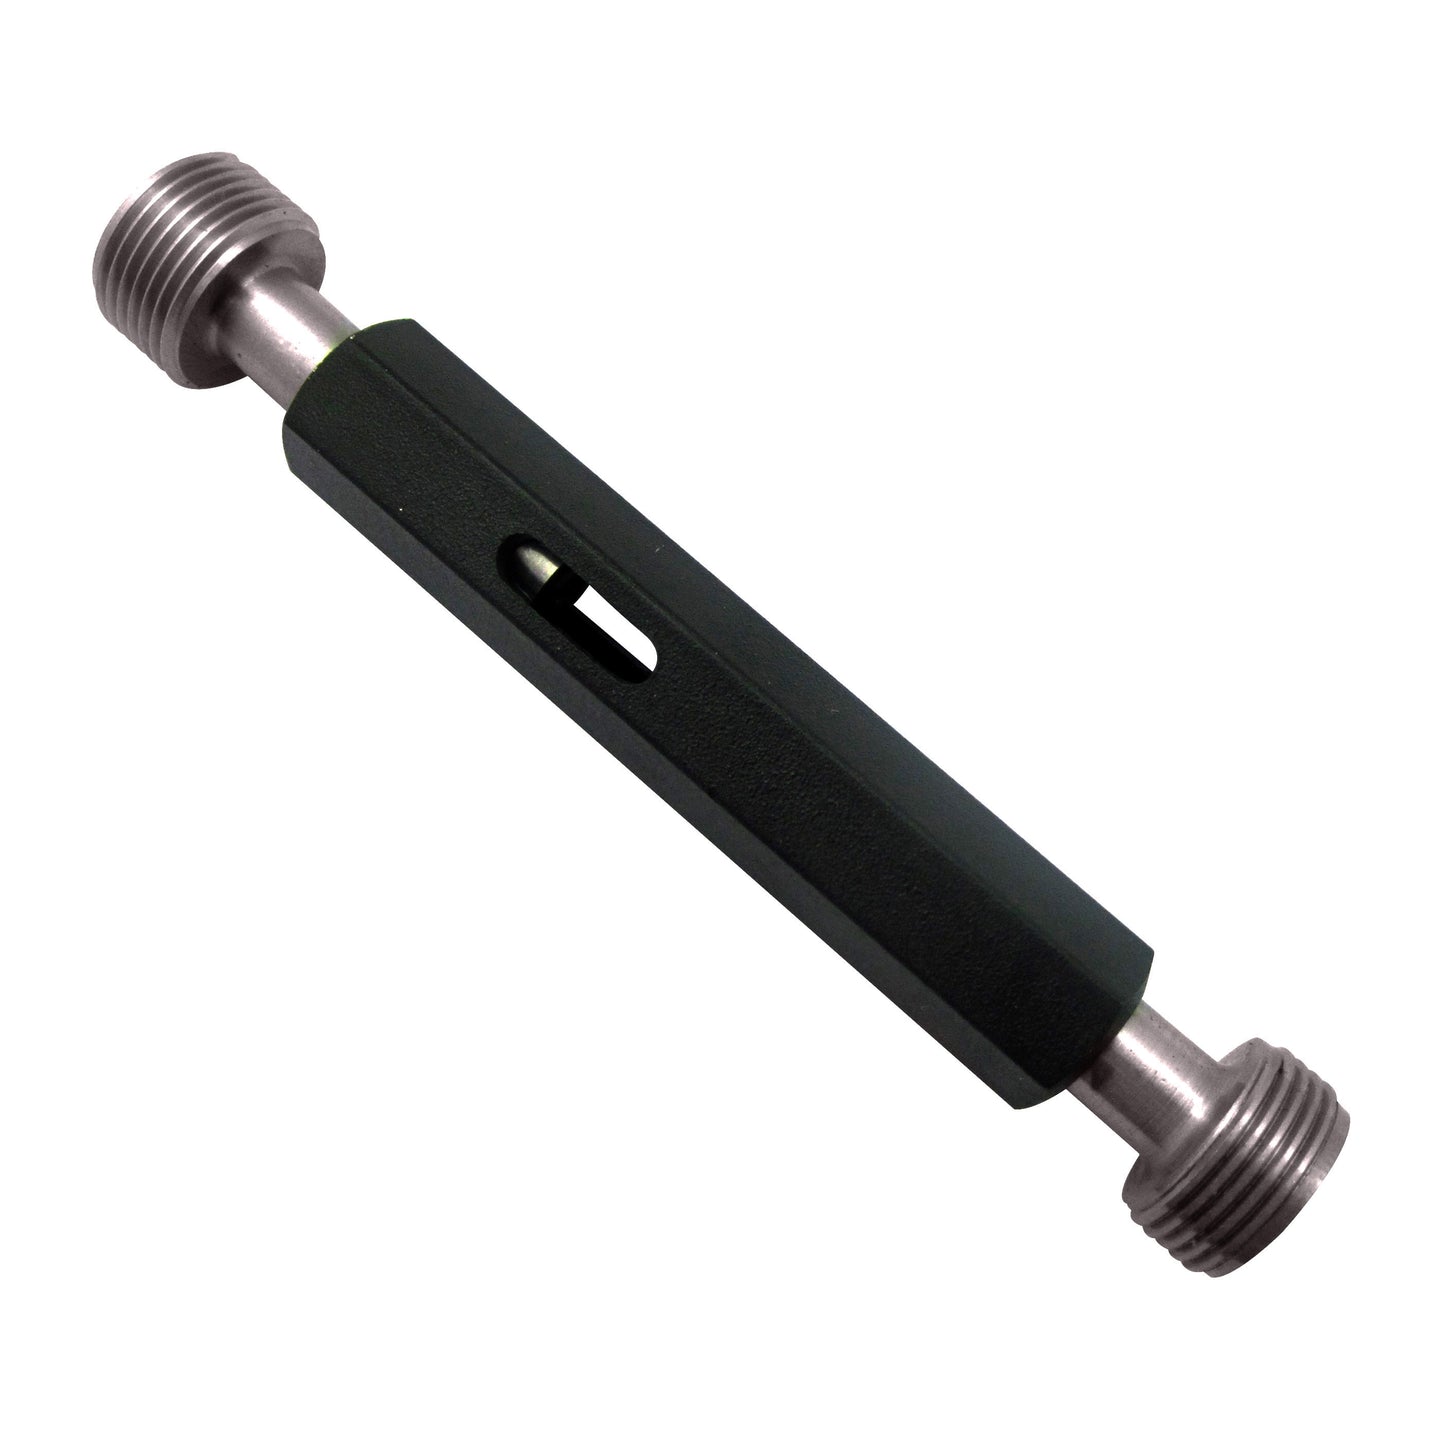 5/8" - 16 Unified Right Hand Thread Plug Gauge